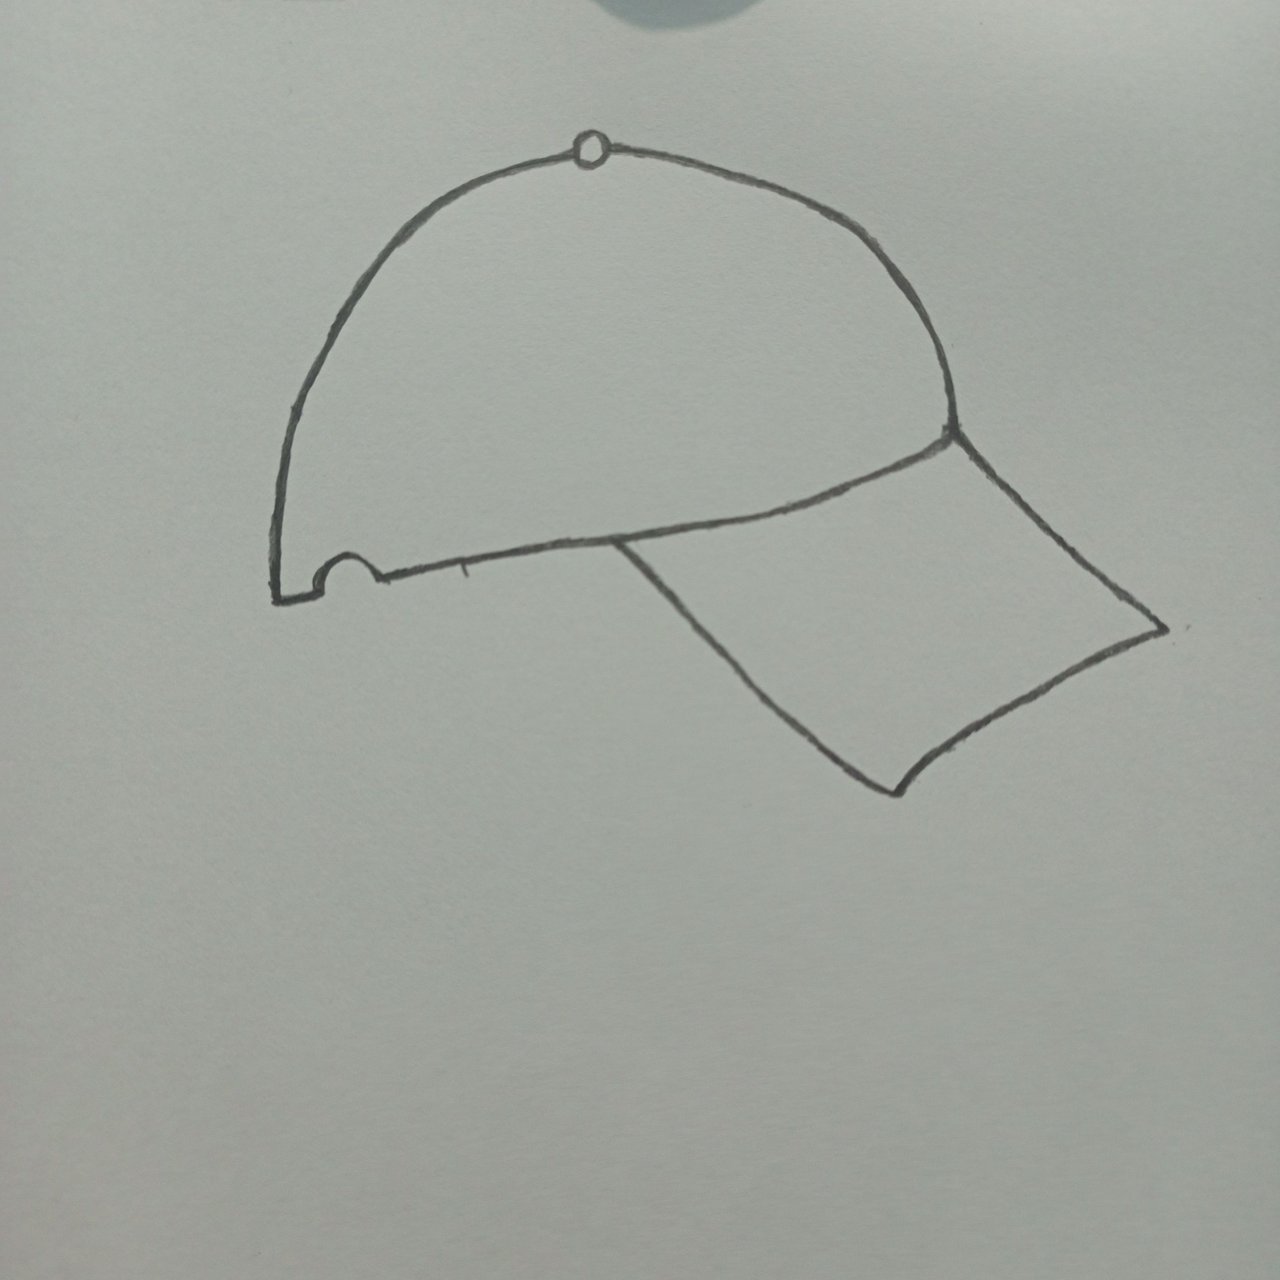 how to draw a baseball cap step by step